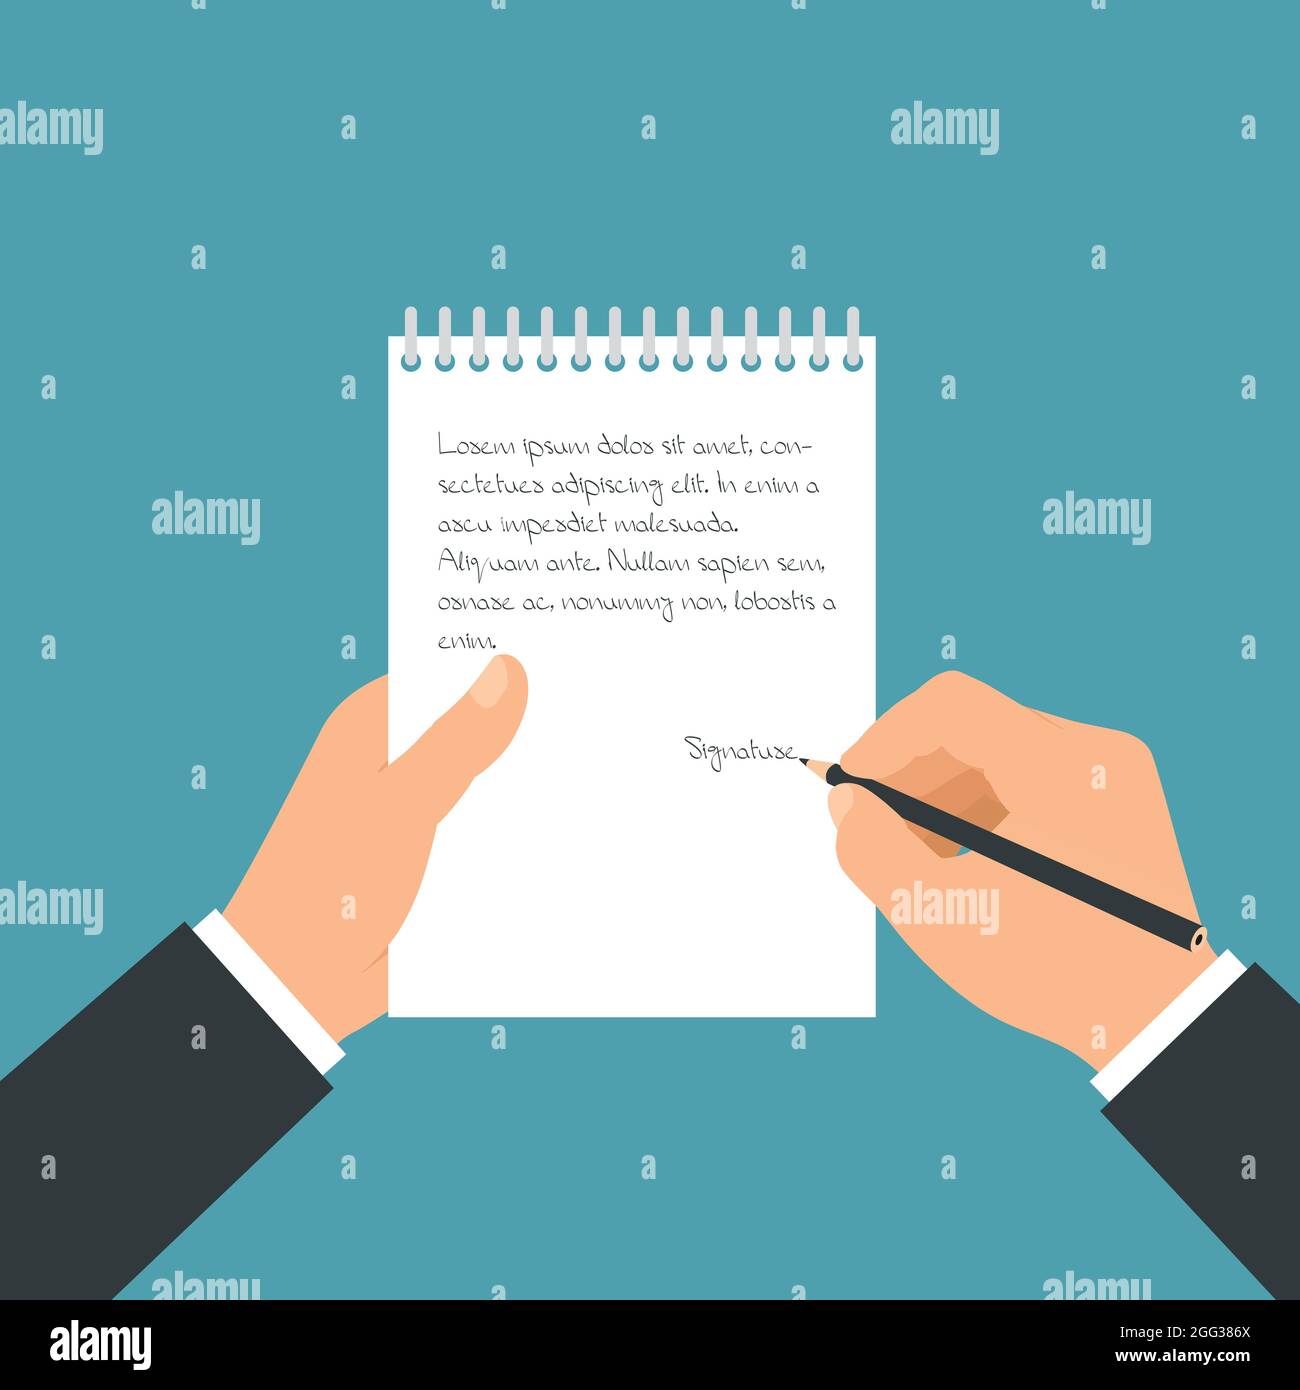 Flat design illustration of a manager's hand holding a paper pad and a pencil. He writes notes in a notebook - vector Stock Vector